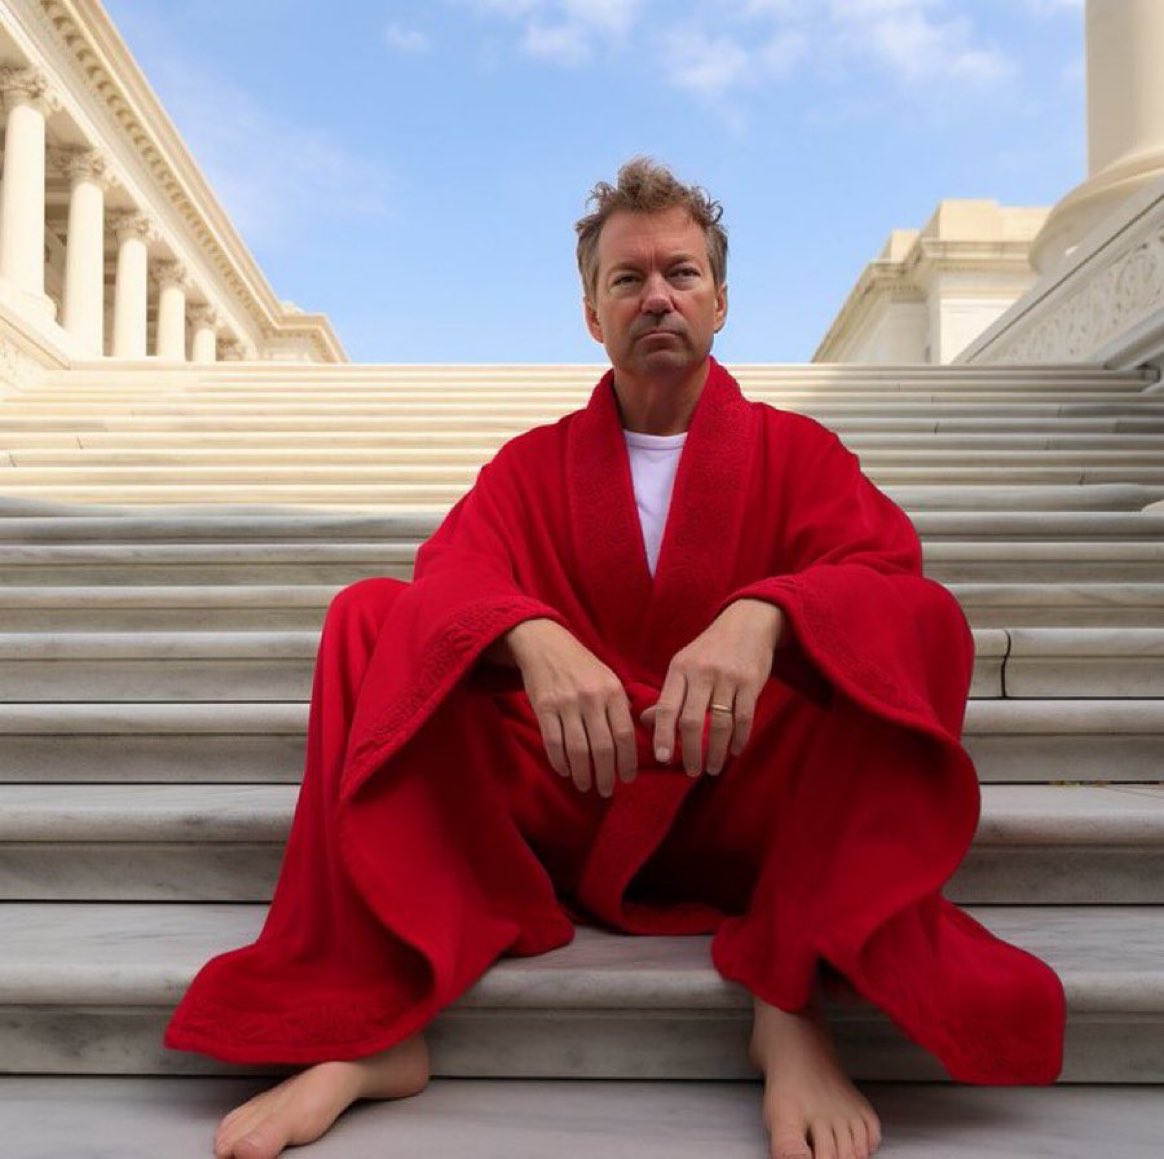 Breaking: Senator Rand Paul showed up to work at the Capitol barefoot wearing a red bathrobe after the Senate changed the dress code to accommodate for John Fetterman.